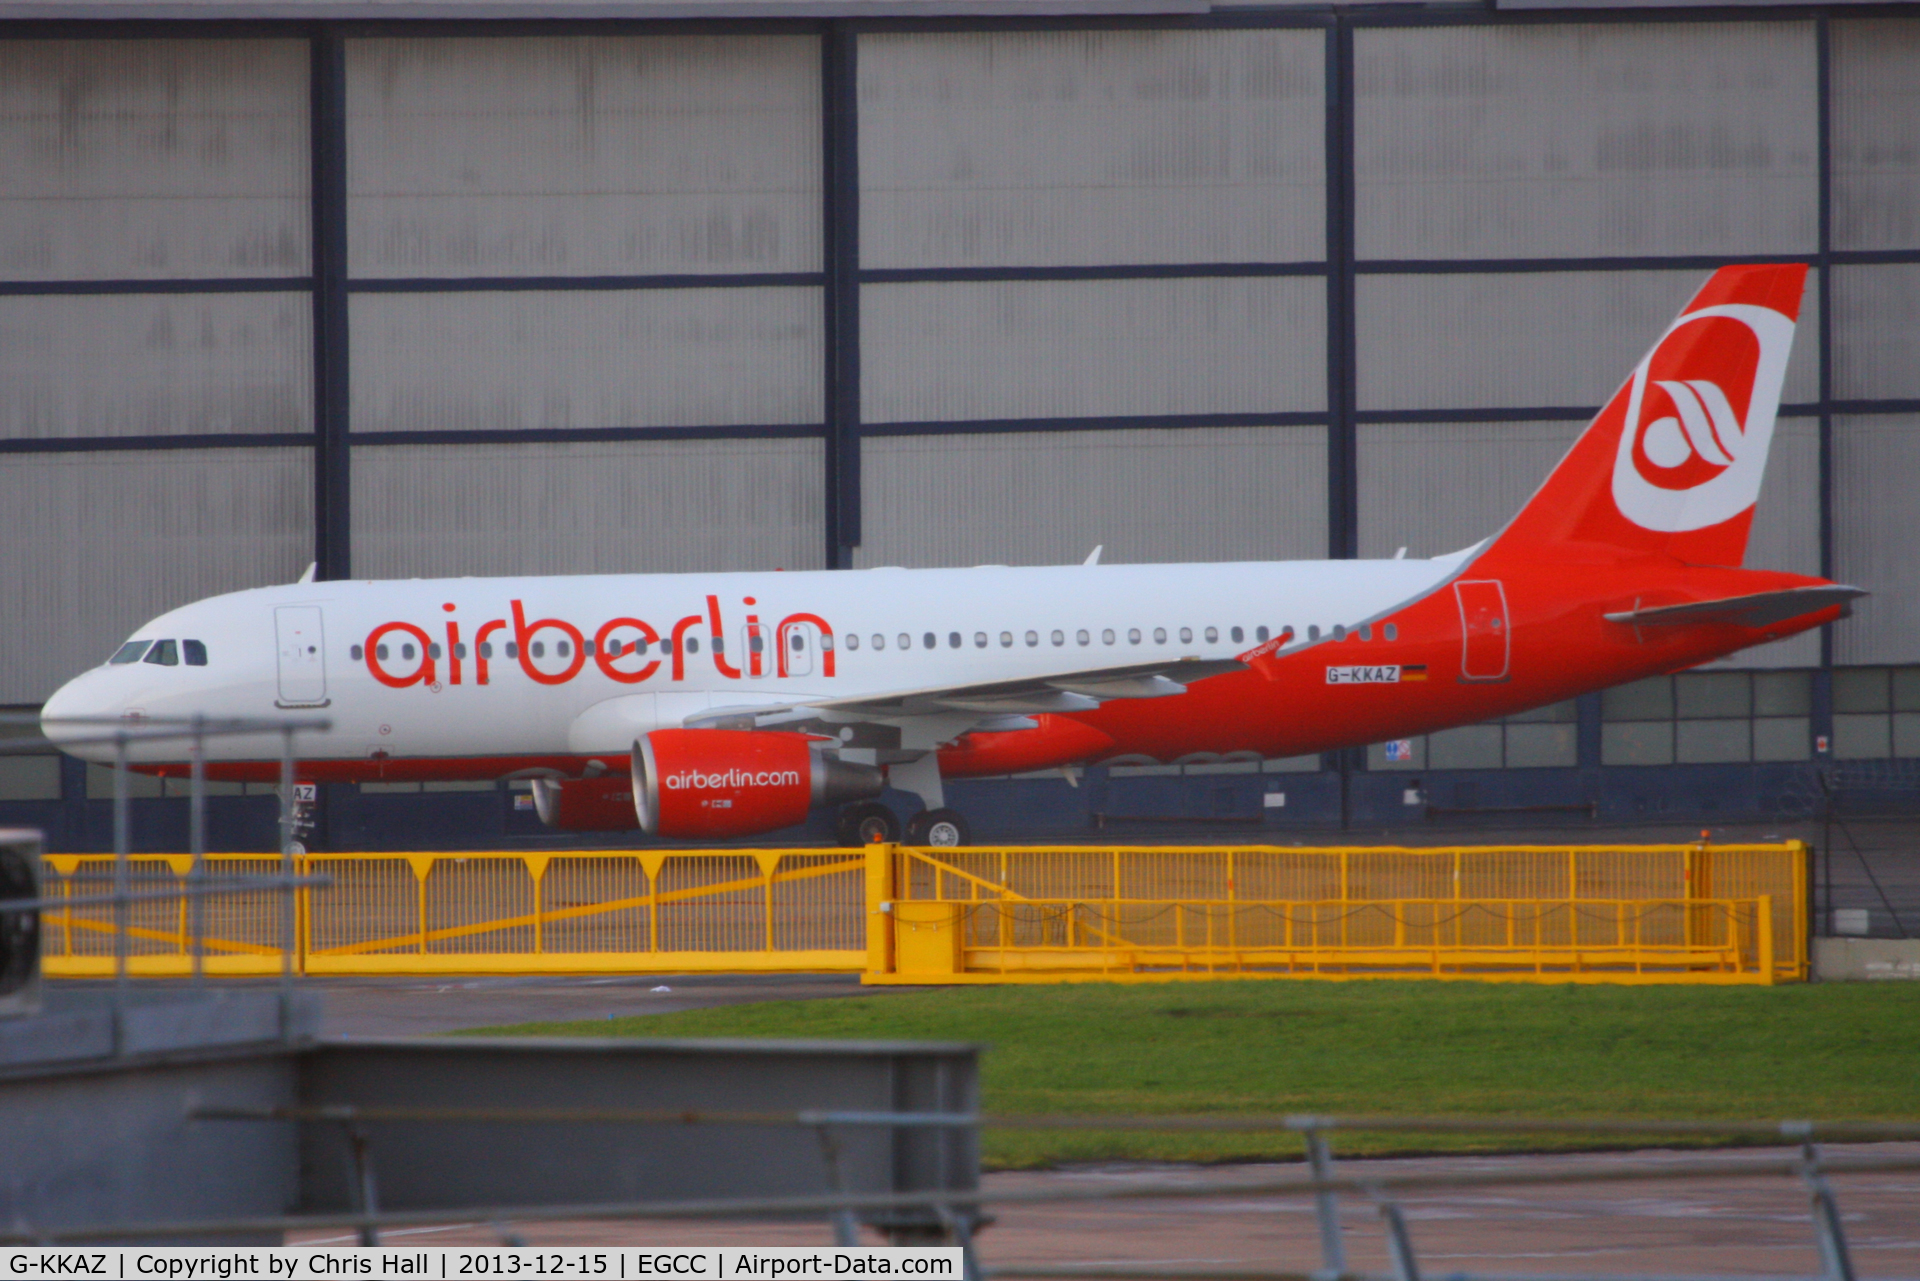 G-KKAZ, 2003 Airbus A320-214 C/N 2003, former Thomas Cook A320 now in Air Berlin livery, it will become D-ABNE